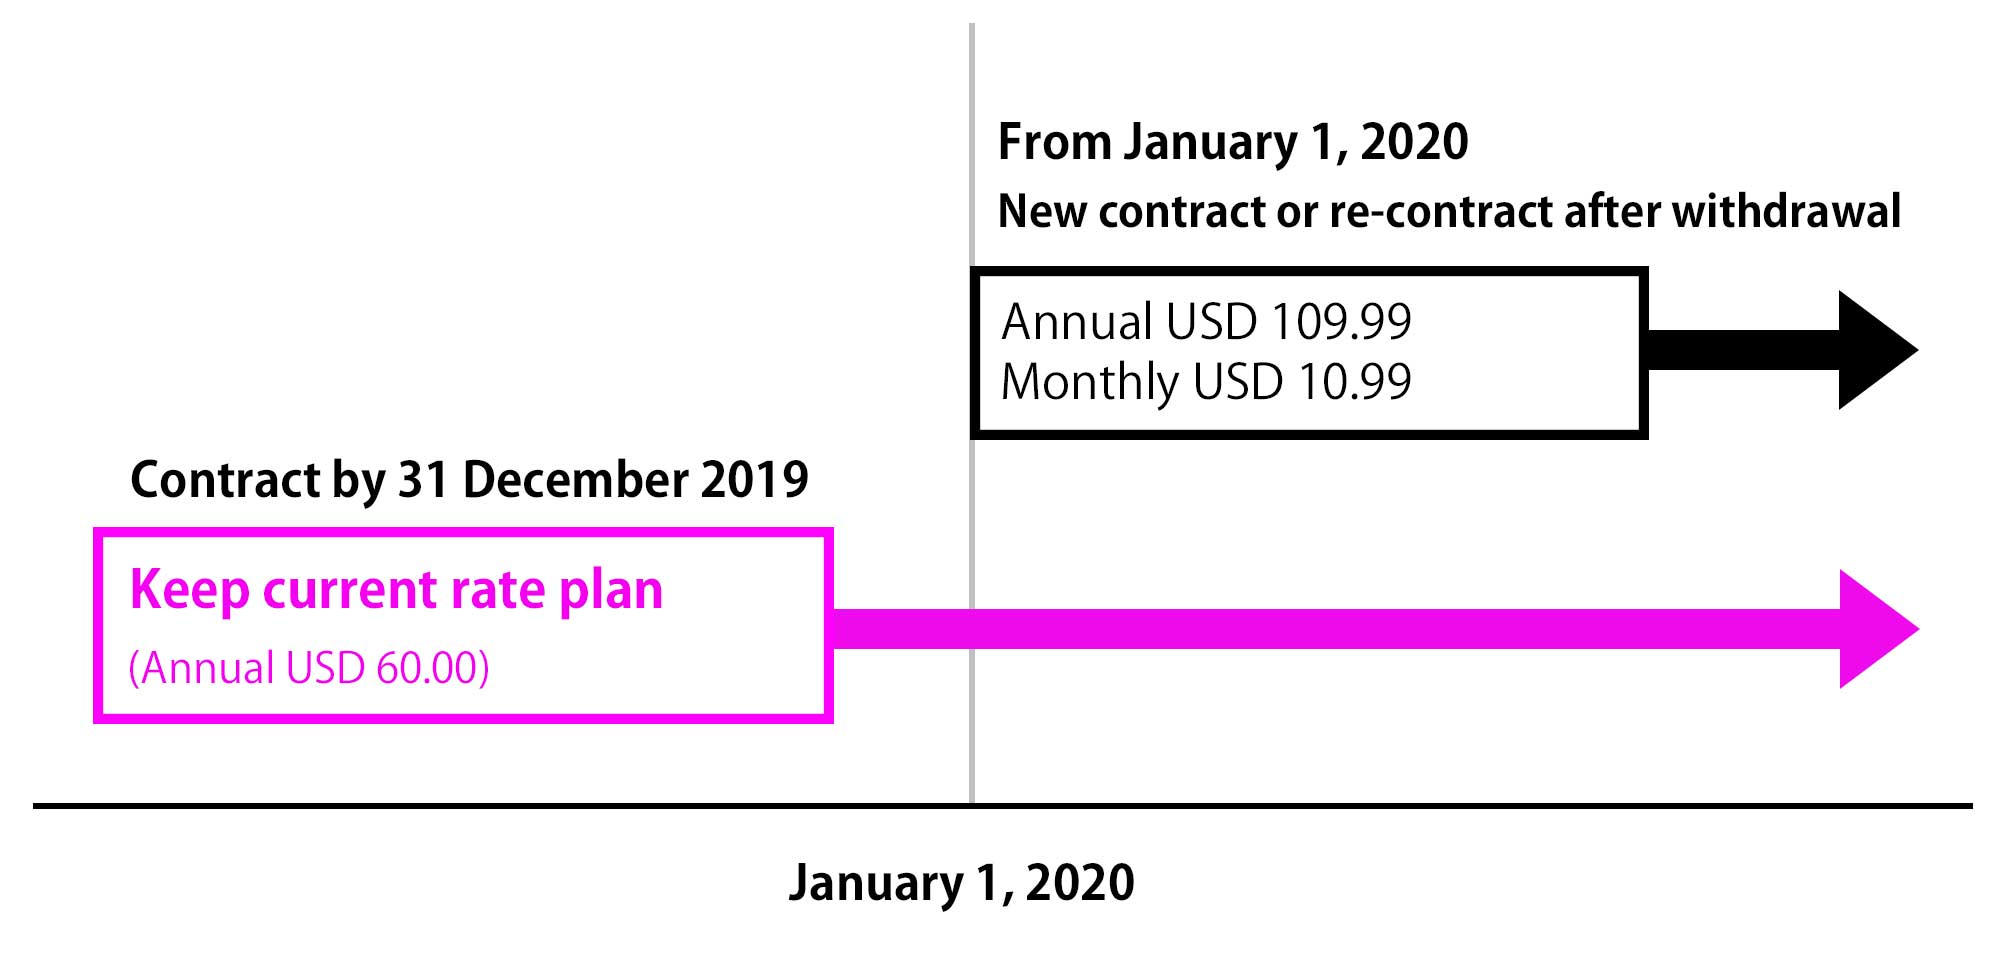 [Important Notice] Starting January 2020, the new subscription price for the Standard Plan on Google Play will be 12,000 yen per year